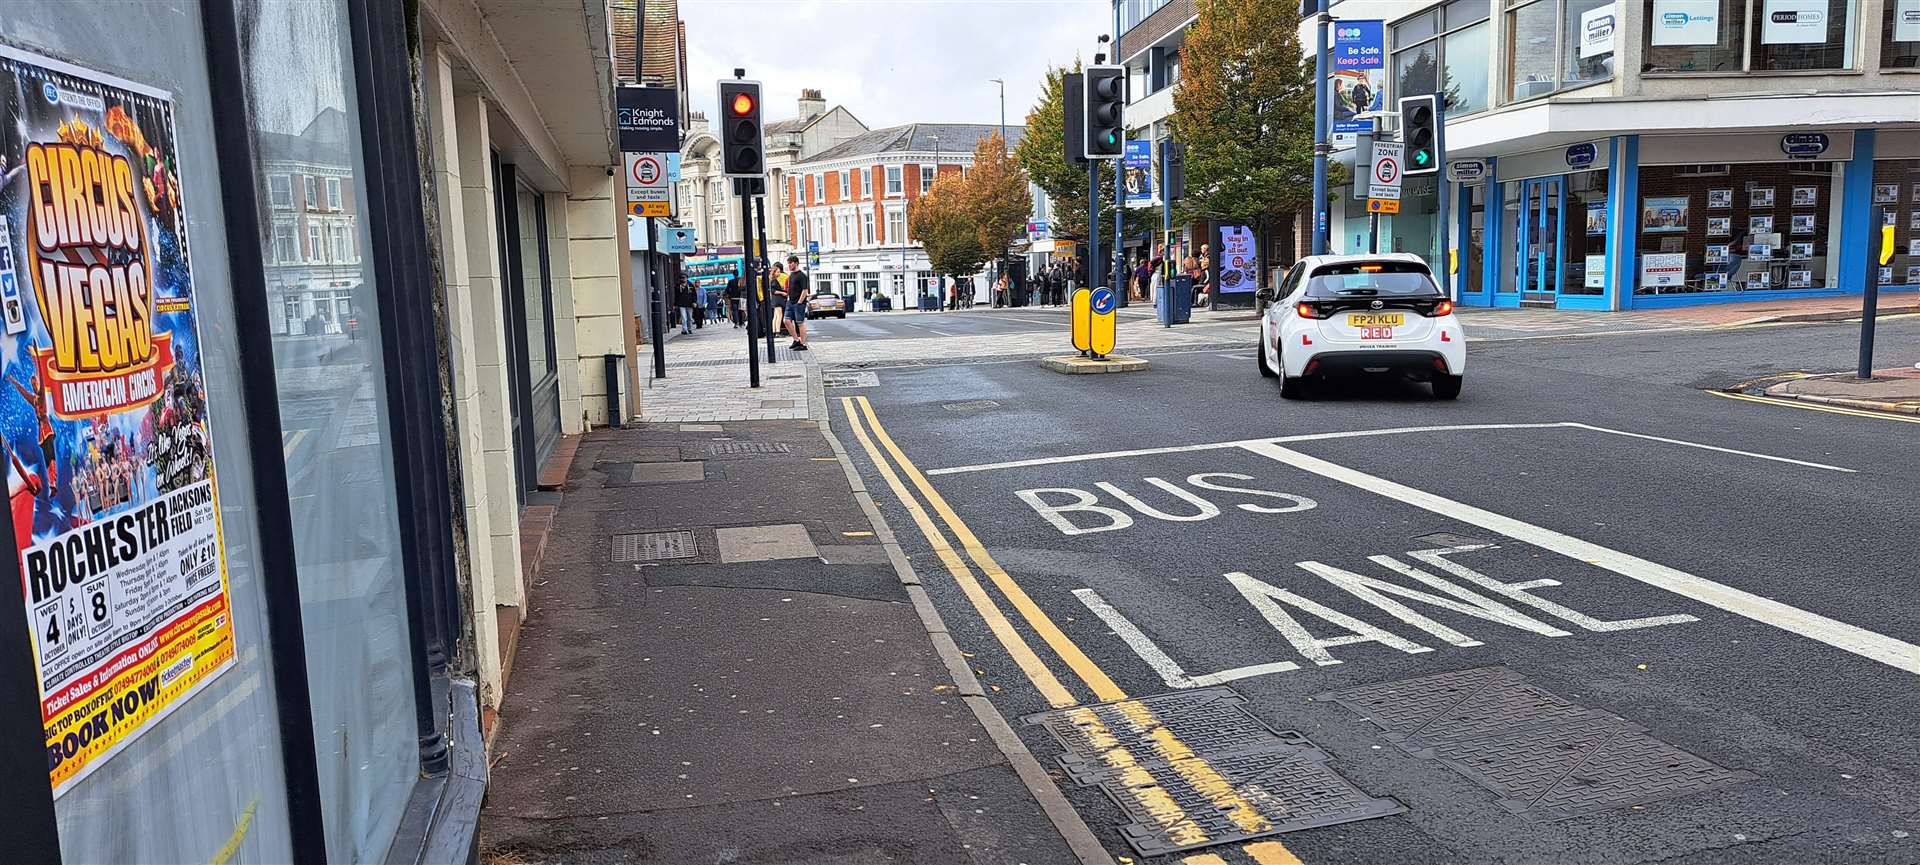 KCC is planning to enforce Maidstone's town centre bus lane with ANPR cameras